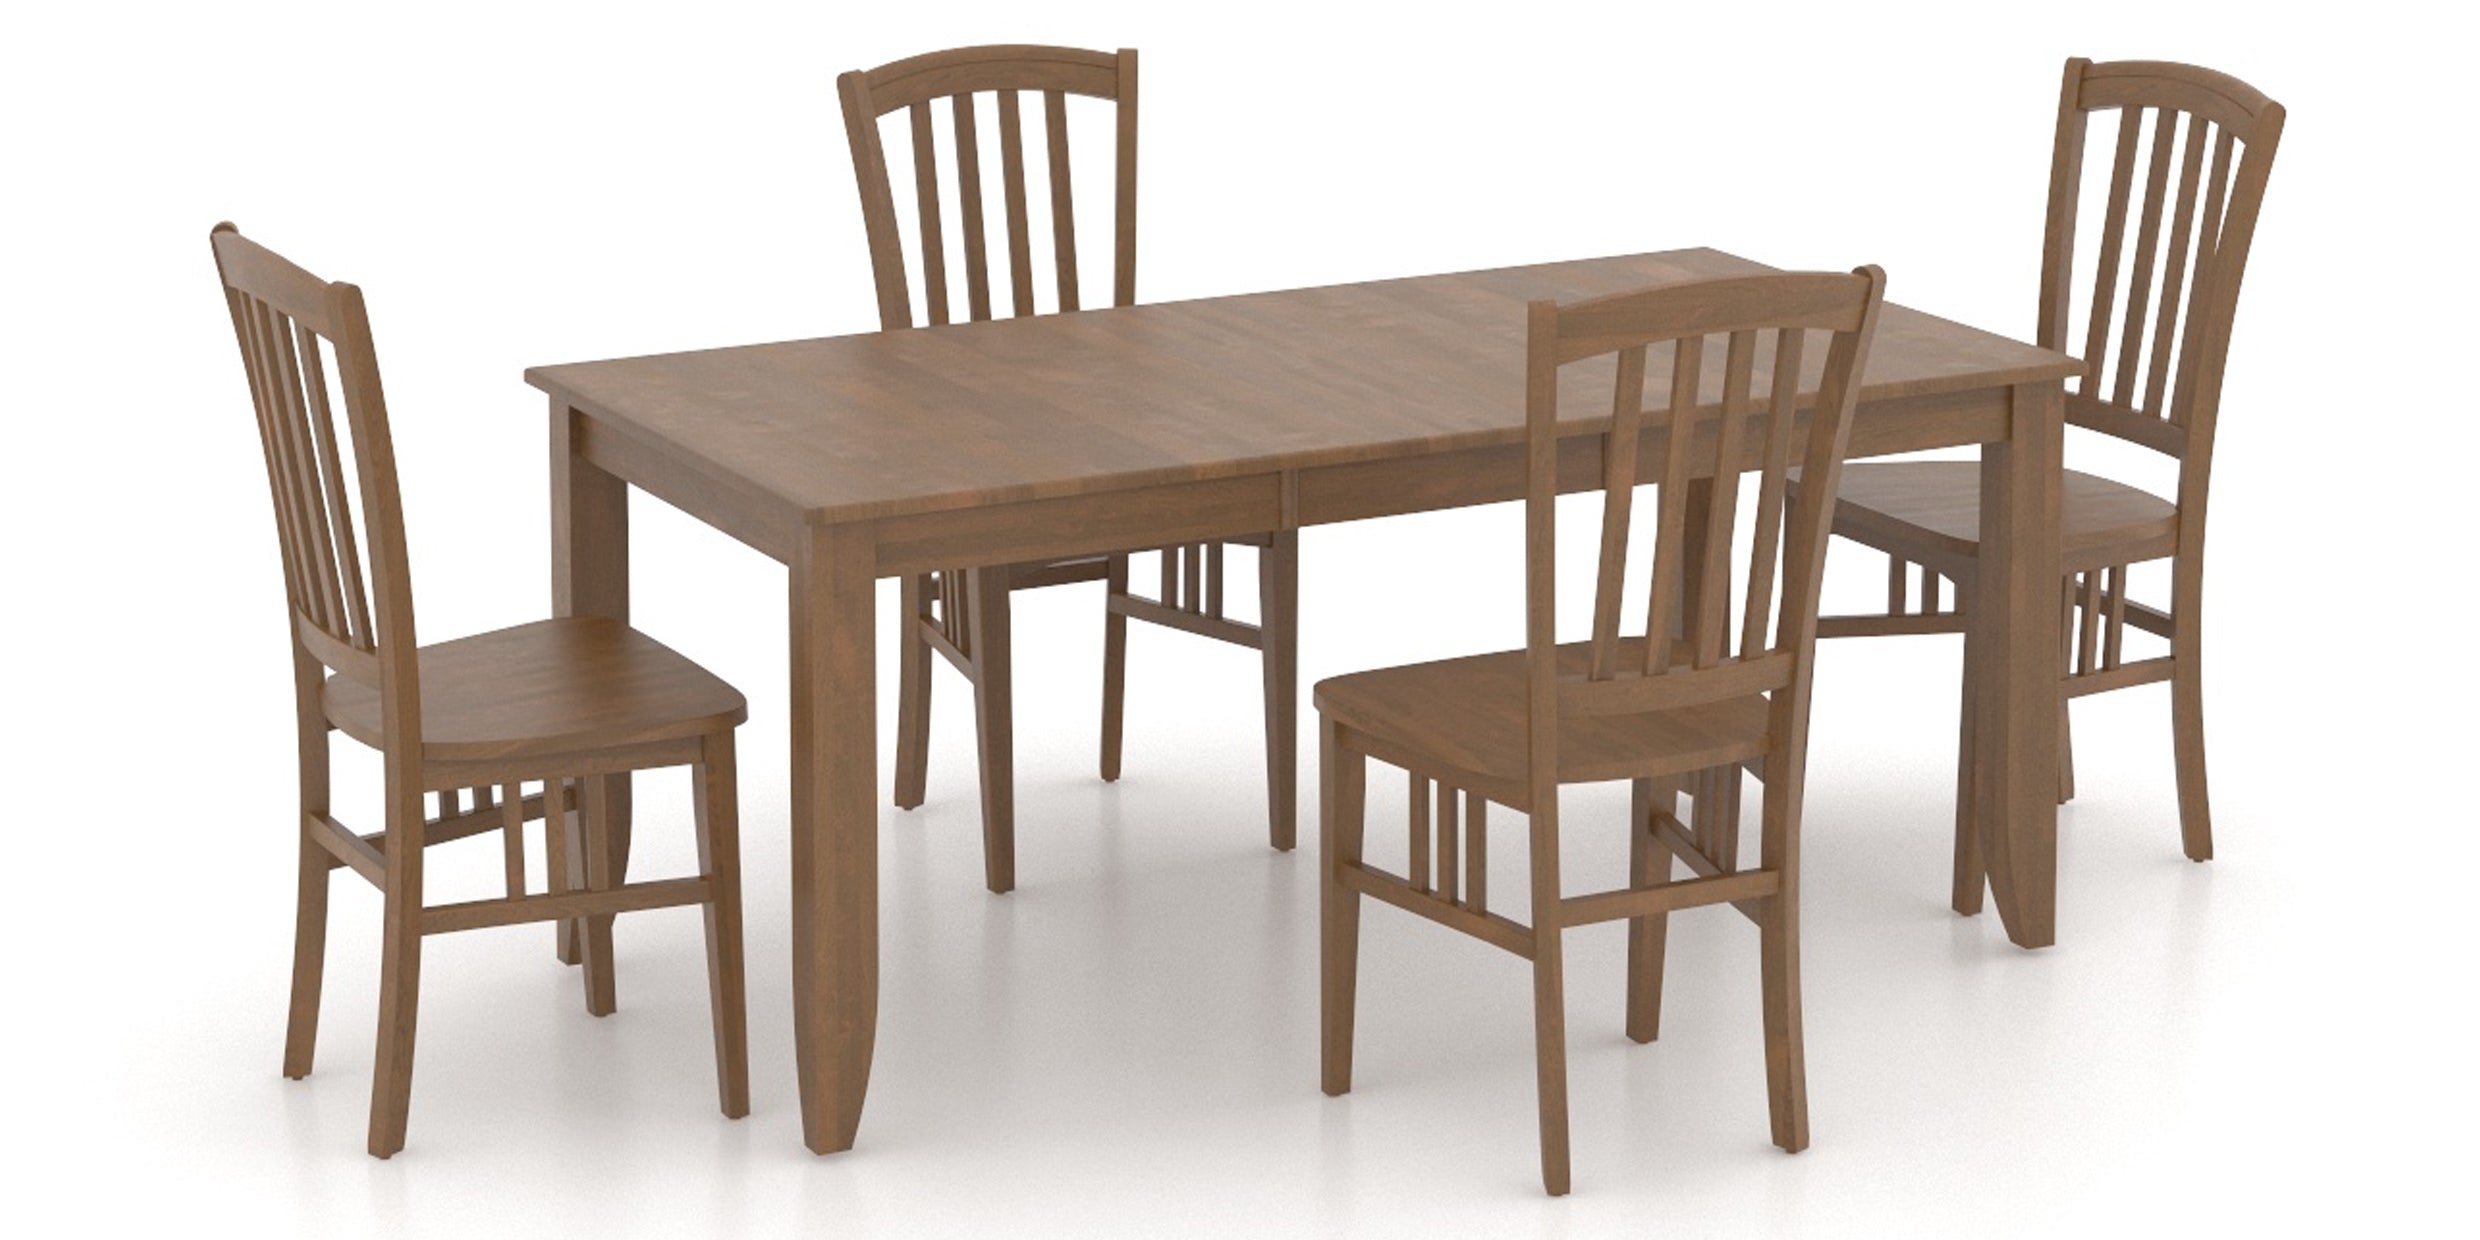 Oak Washed Birch with Matte Finish | Canadel Core 3648 Dining Set | Valley Ridge Furniture